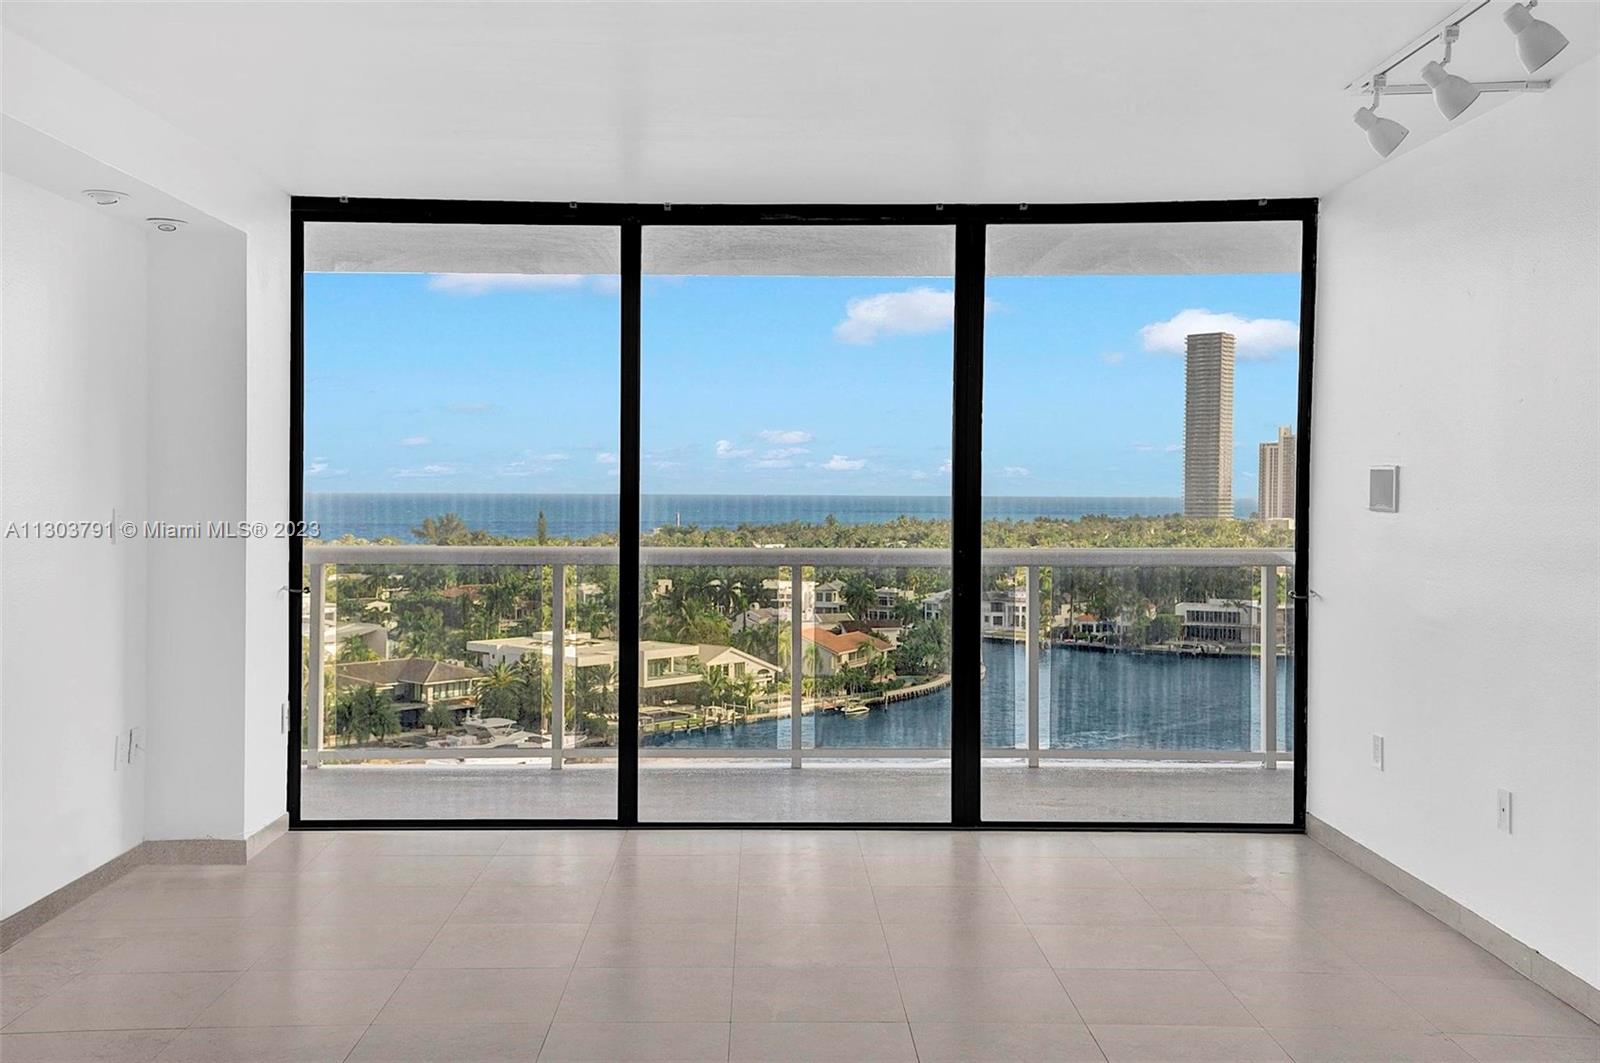 RARE!!A real gem!! High floor. remodeled 2 Bed 2 Bath condo. Waterfront building on most desirable street address in Aventura, Country Club Drive. Unobstructed direct ocean and intercostal view. Breathtaking water views from each of the rooms. Split plan, washer and dryer in unit. Huge baloney accessible from each bedroom. Extra storage space.